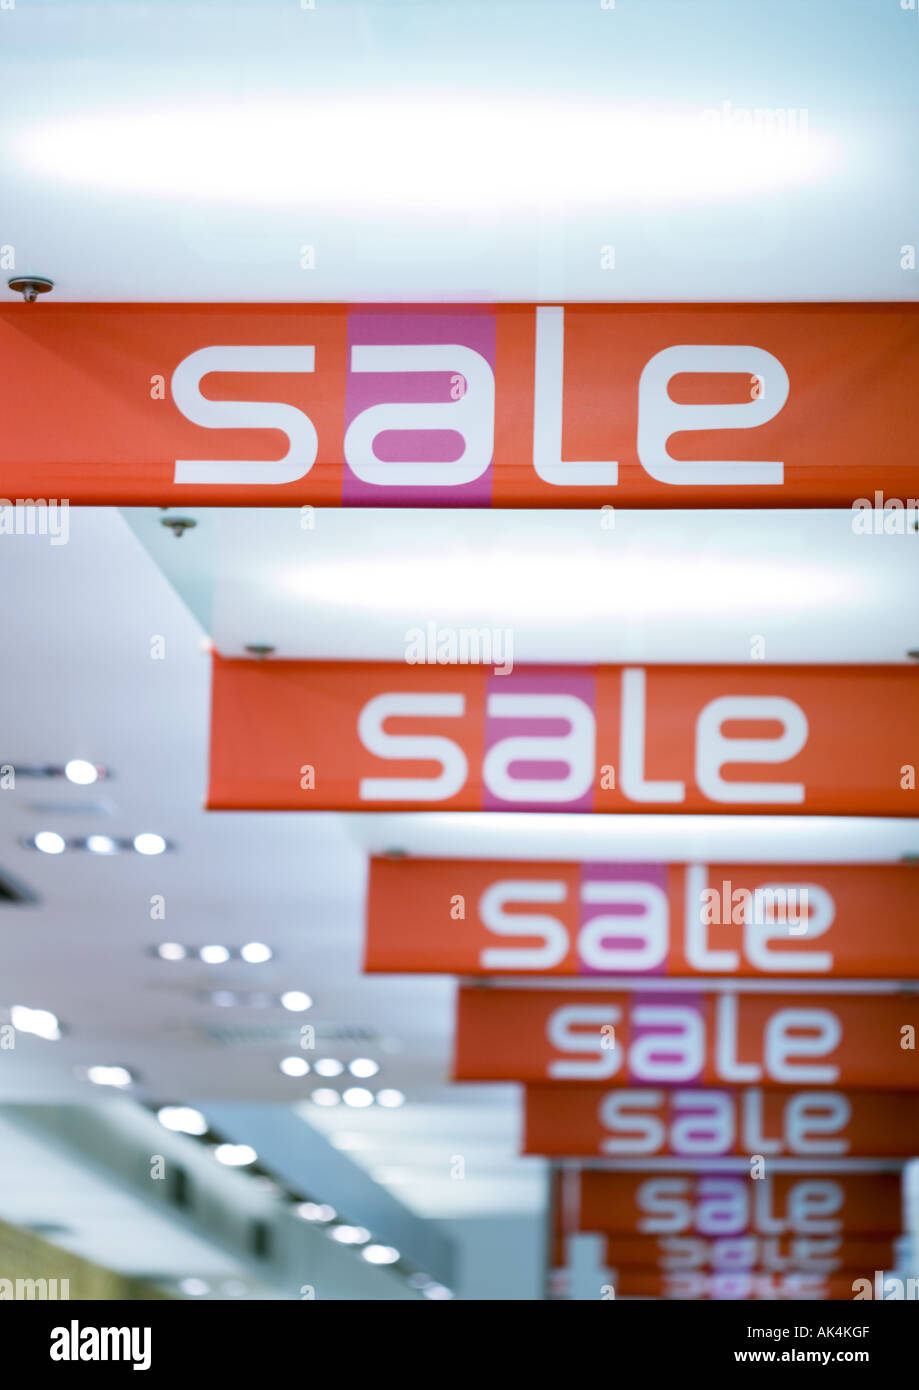 Sale signs hanging from ceiling Stock Photo